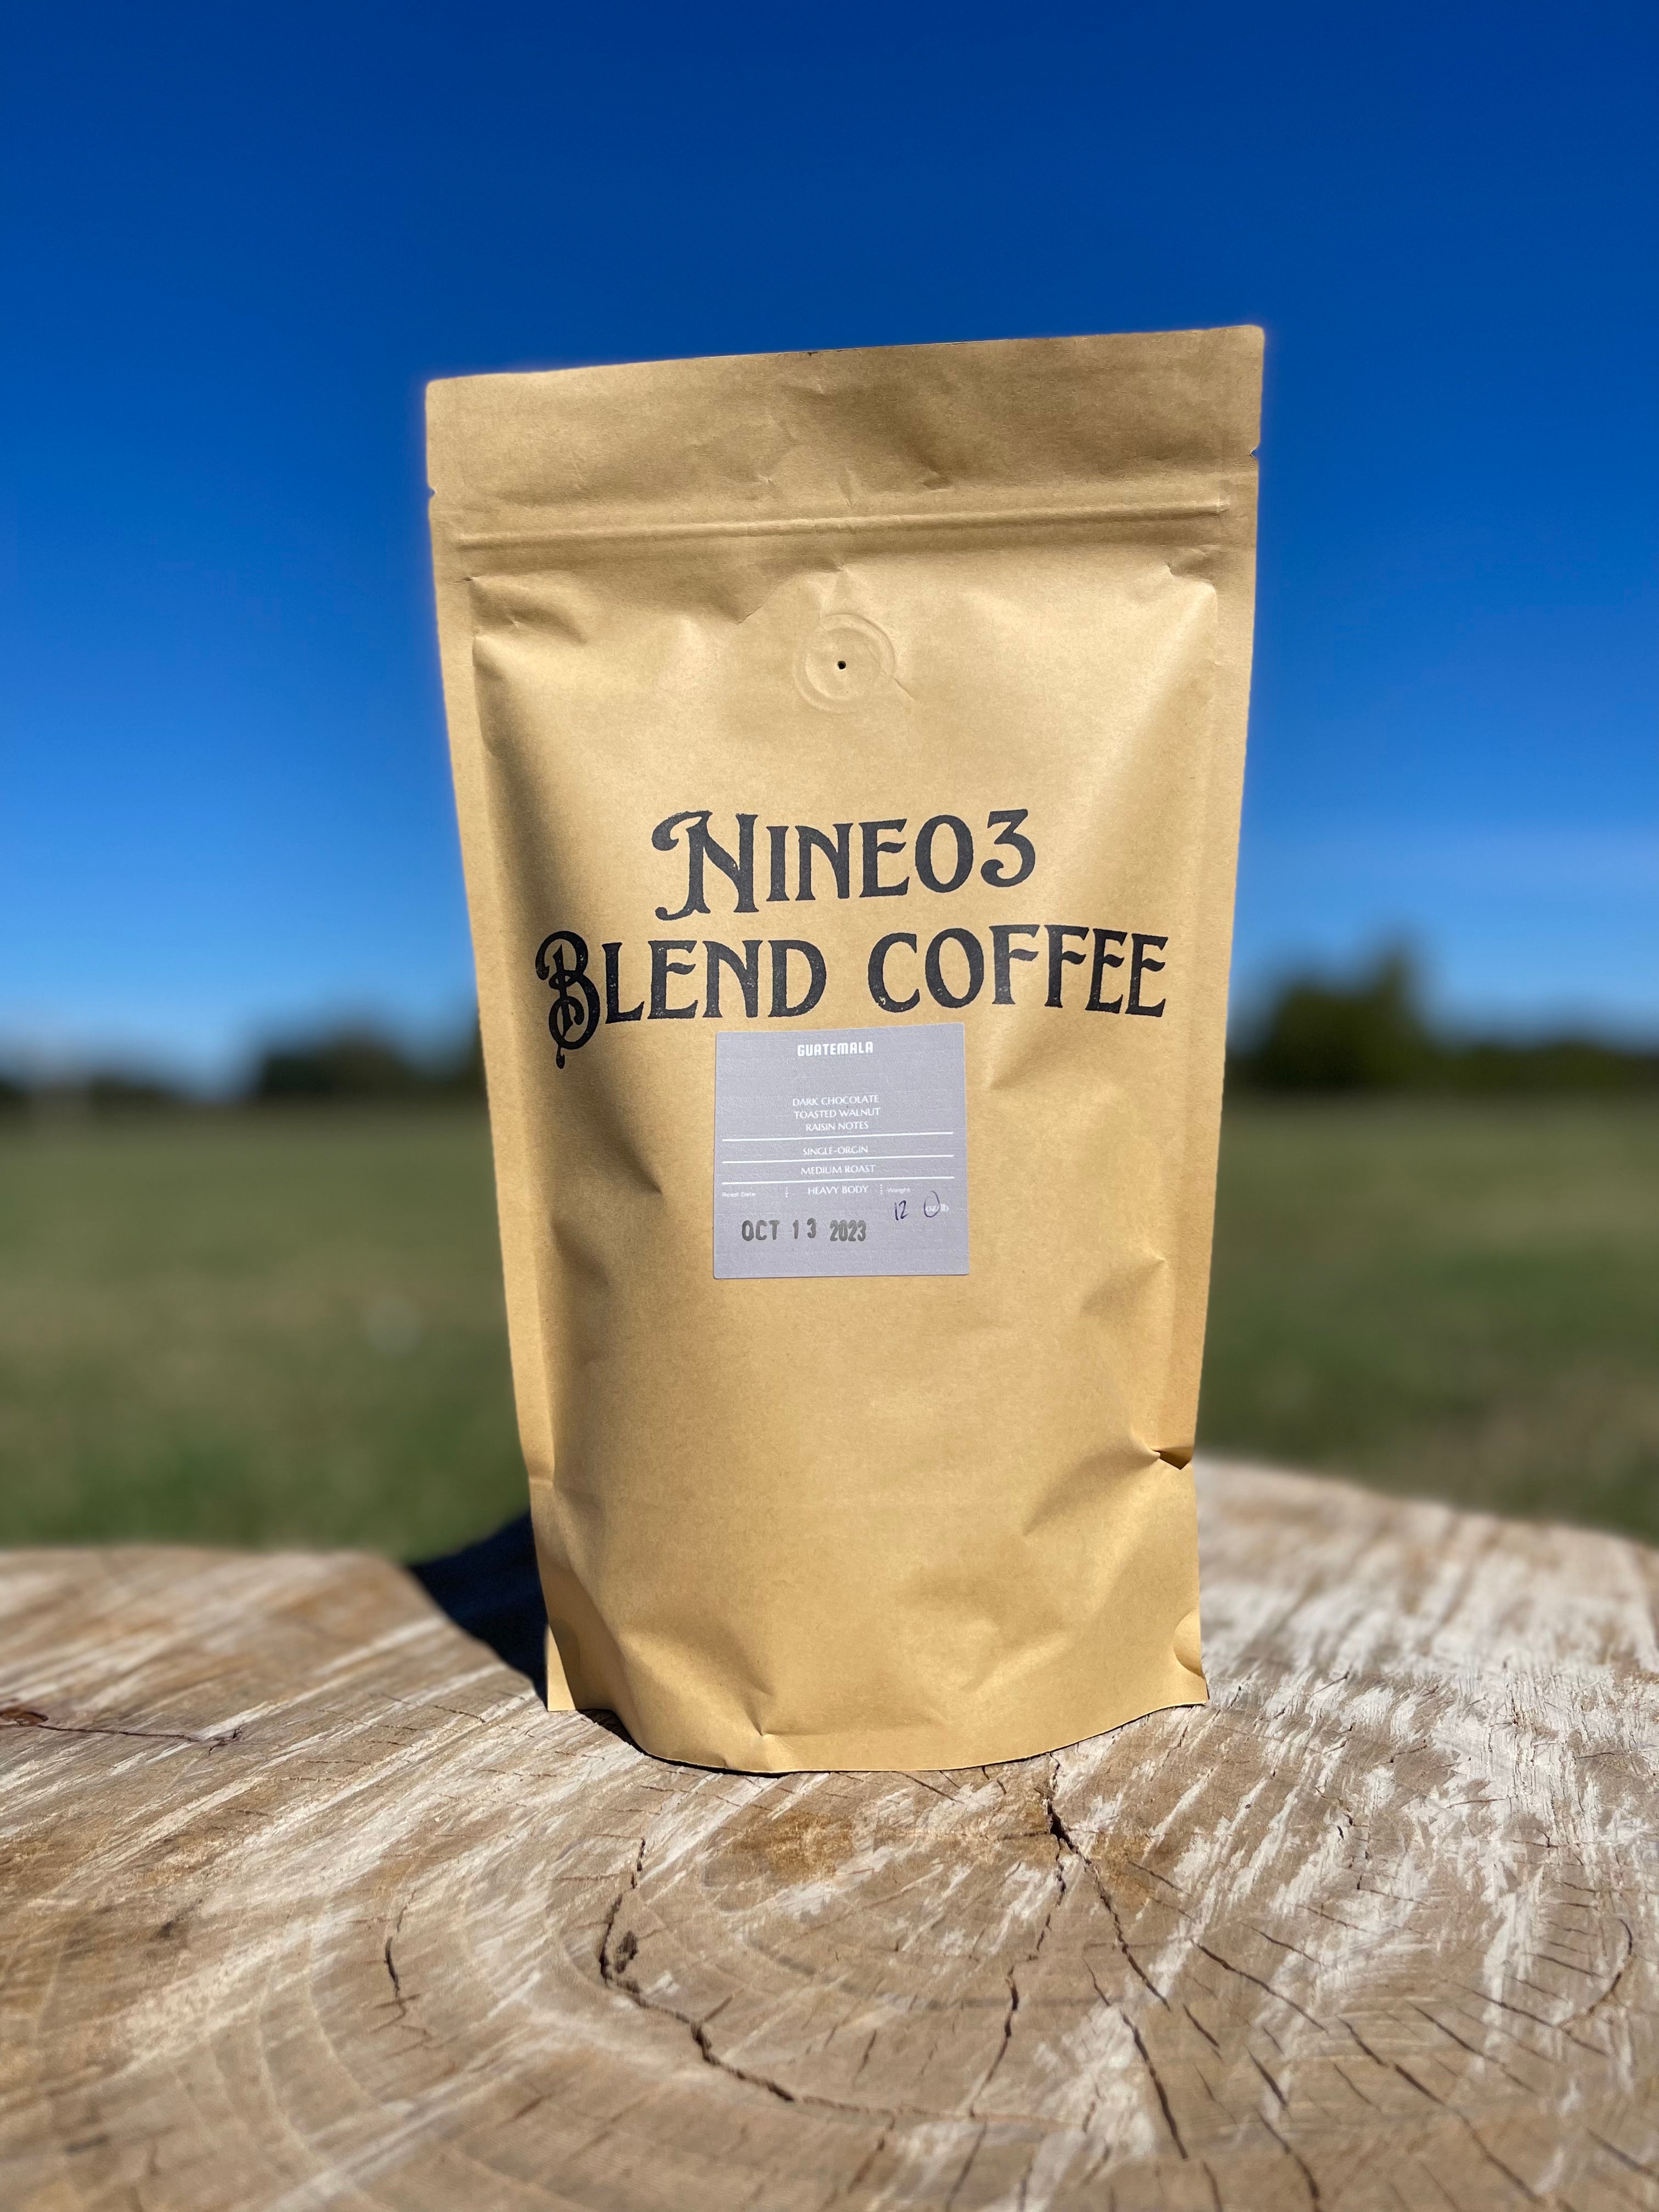 Monthly Coffee Subscription - 12 oz coffee - Guatemala Blend WHOLE BEANS